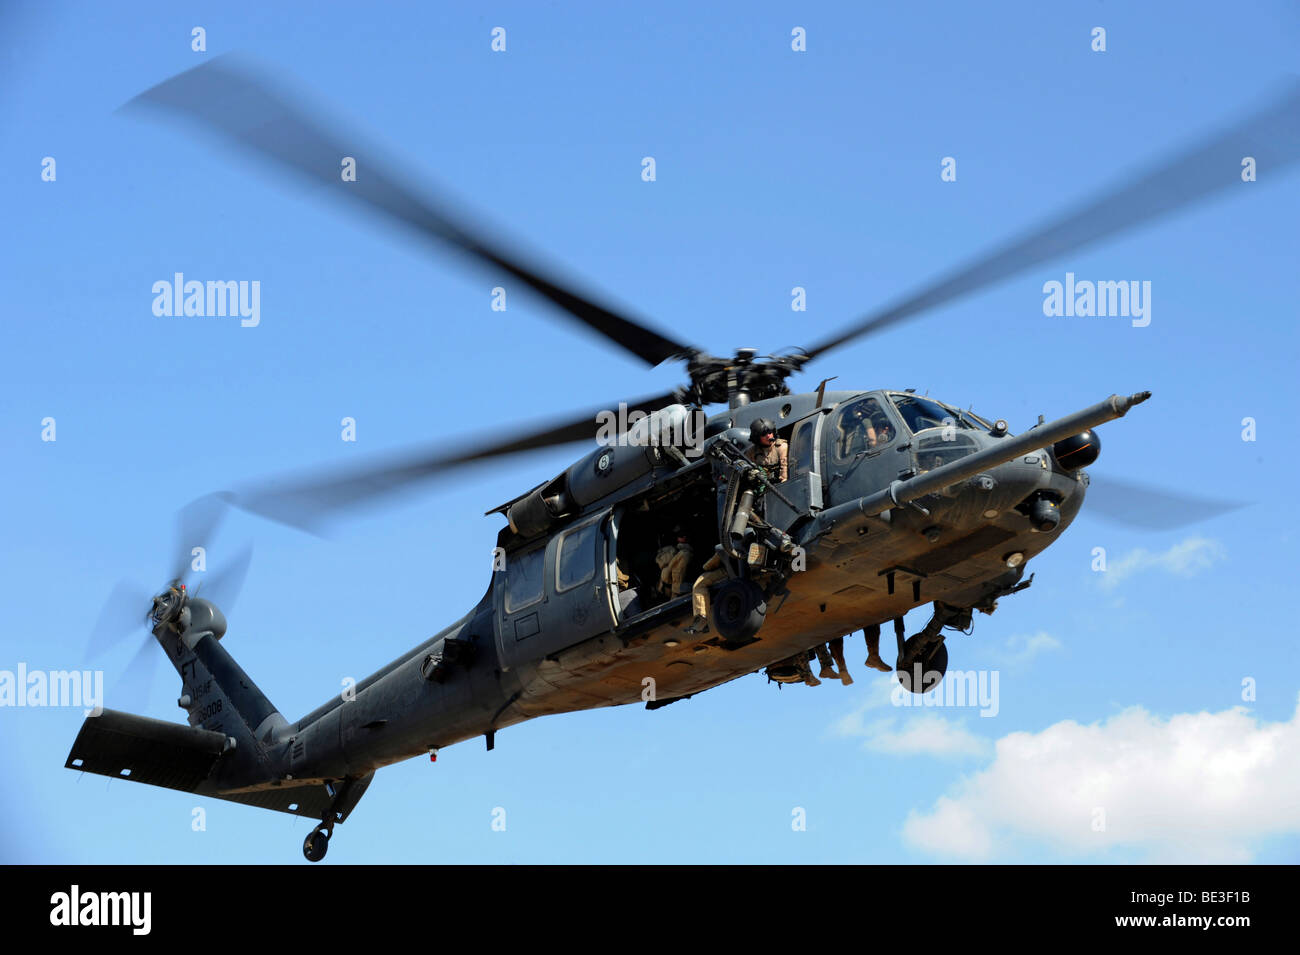 A U.S. Air Force HH-60 Pavehawk comes in for a landing. Stock Photo